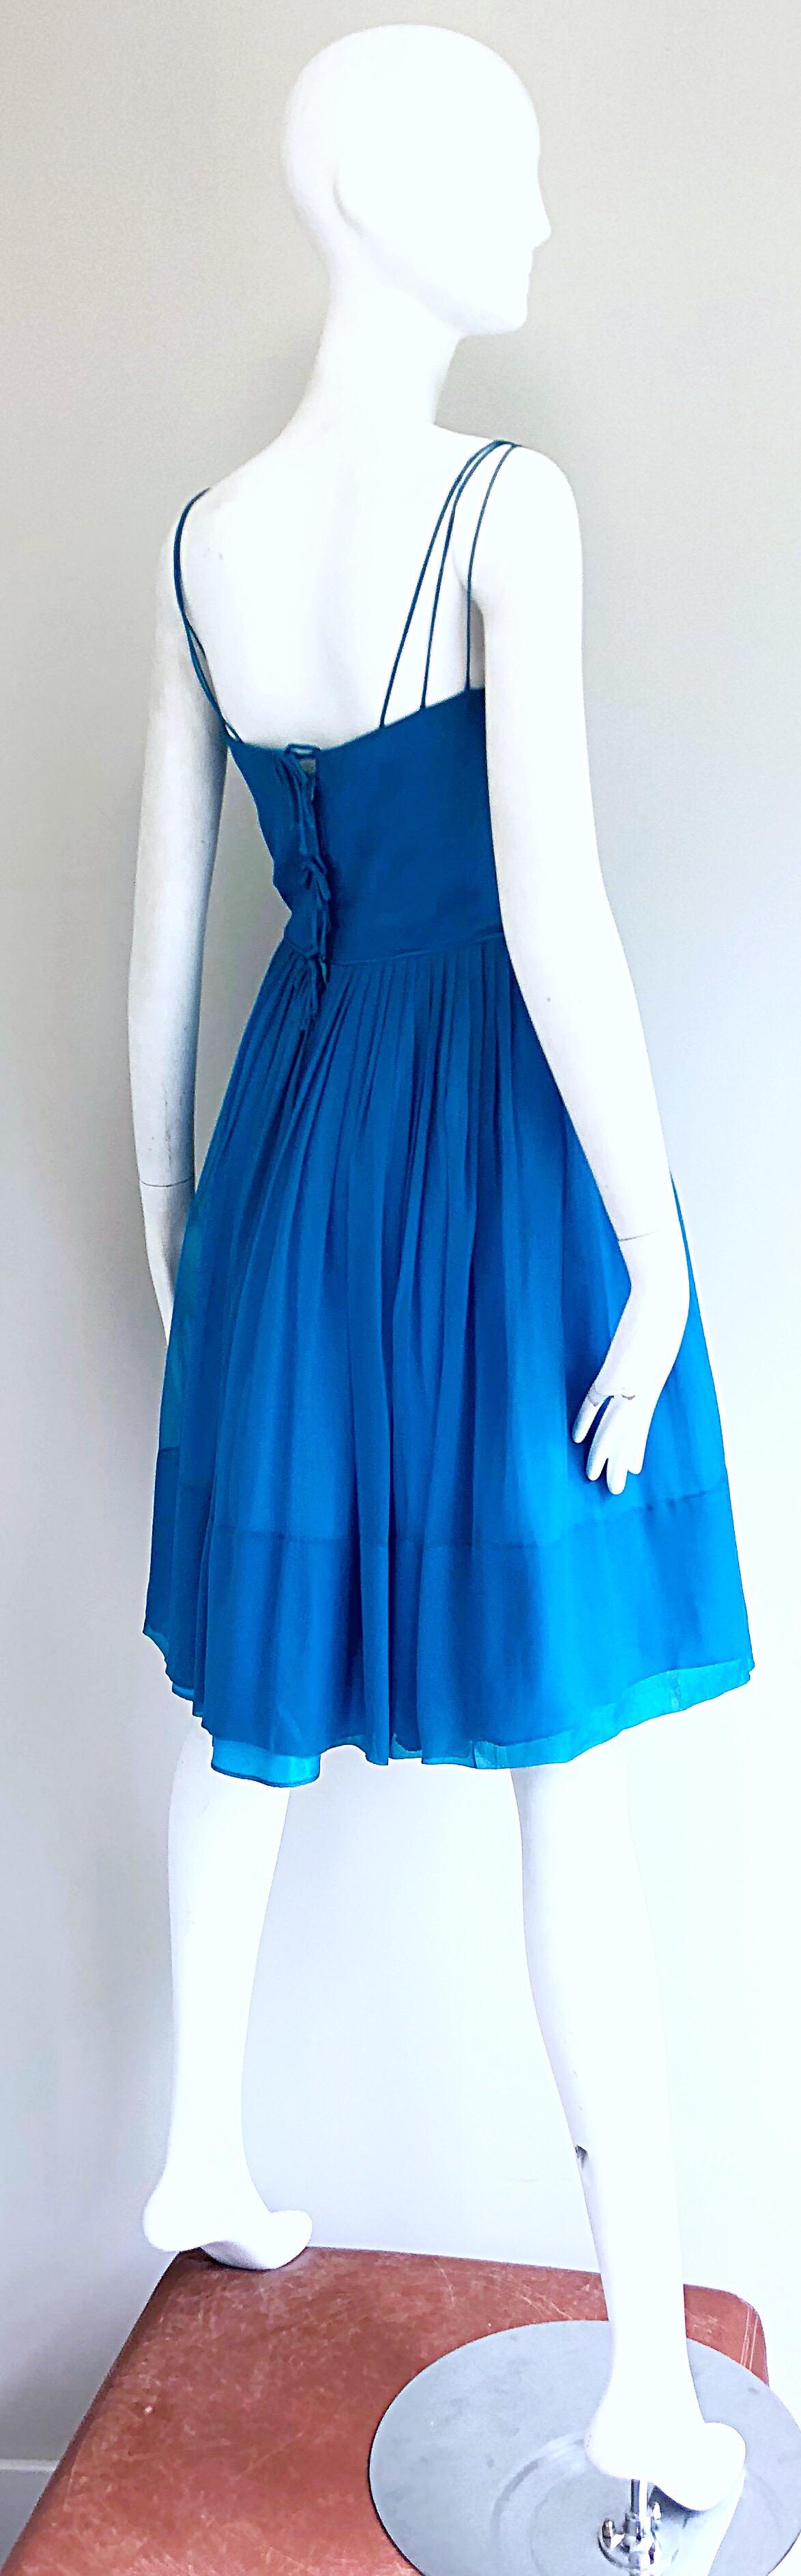 1950s Turquoise Blue Silk Chiffon Nude Illusion Fit n' Flare Vintage 50s Dress 6